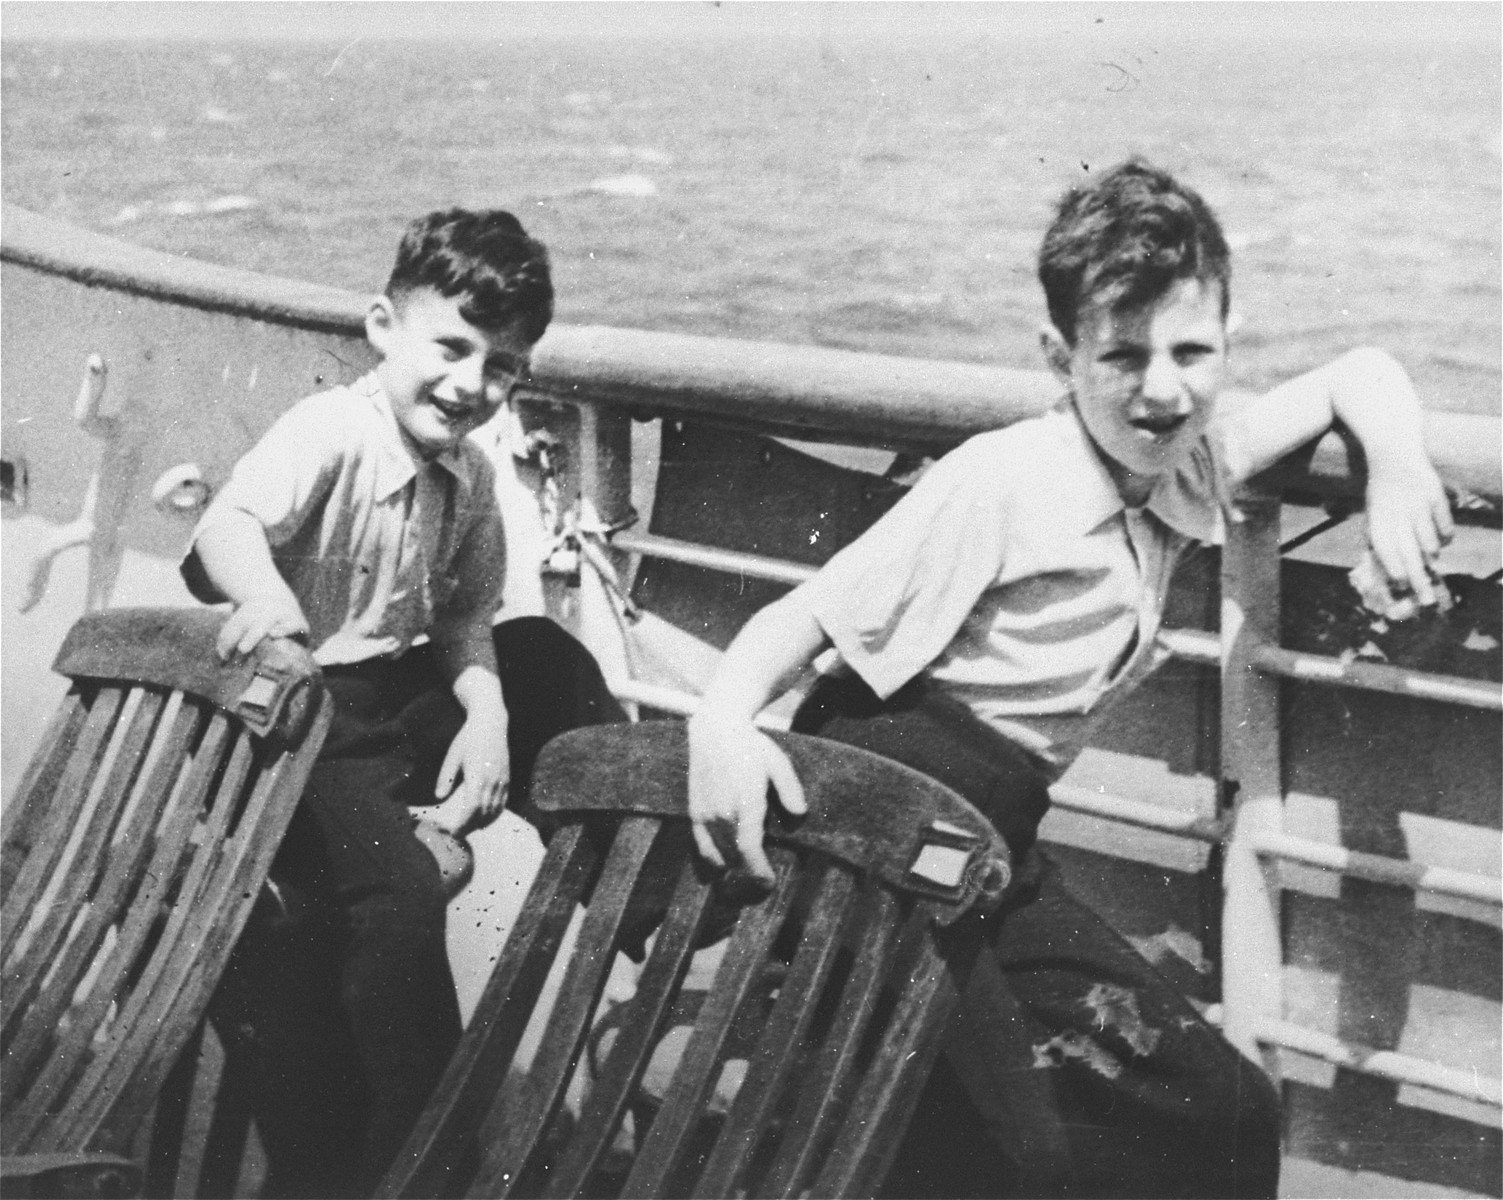 Gerd and Rolf Altschul brothers sit by the railing on board the St. Louis.  

Photo from the personal St. Louis photo album assembled by Lotte Altschul.